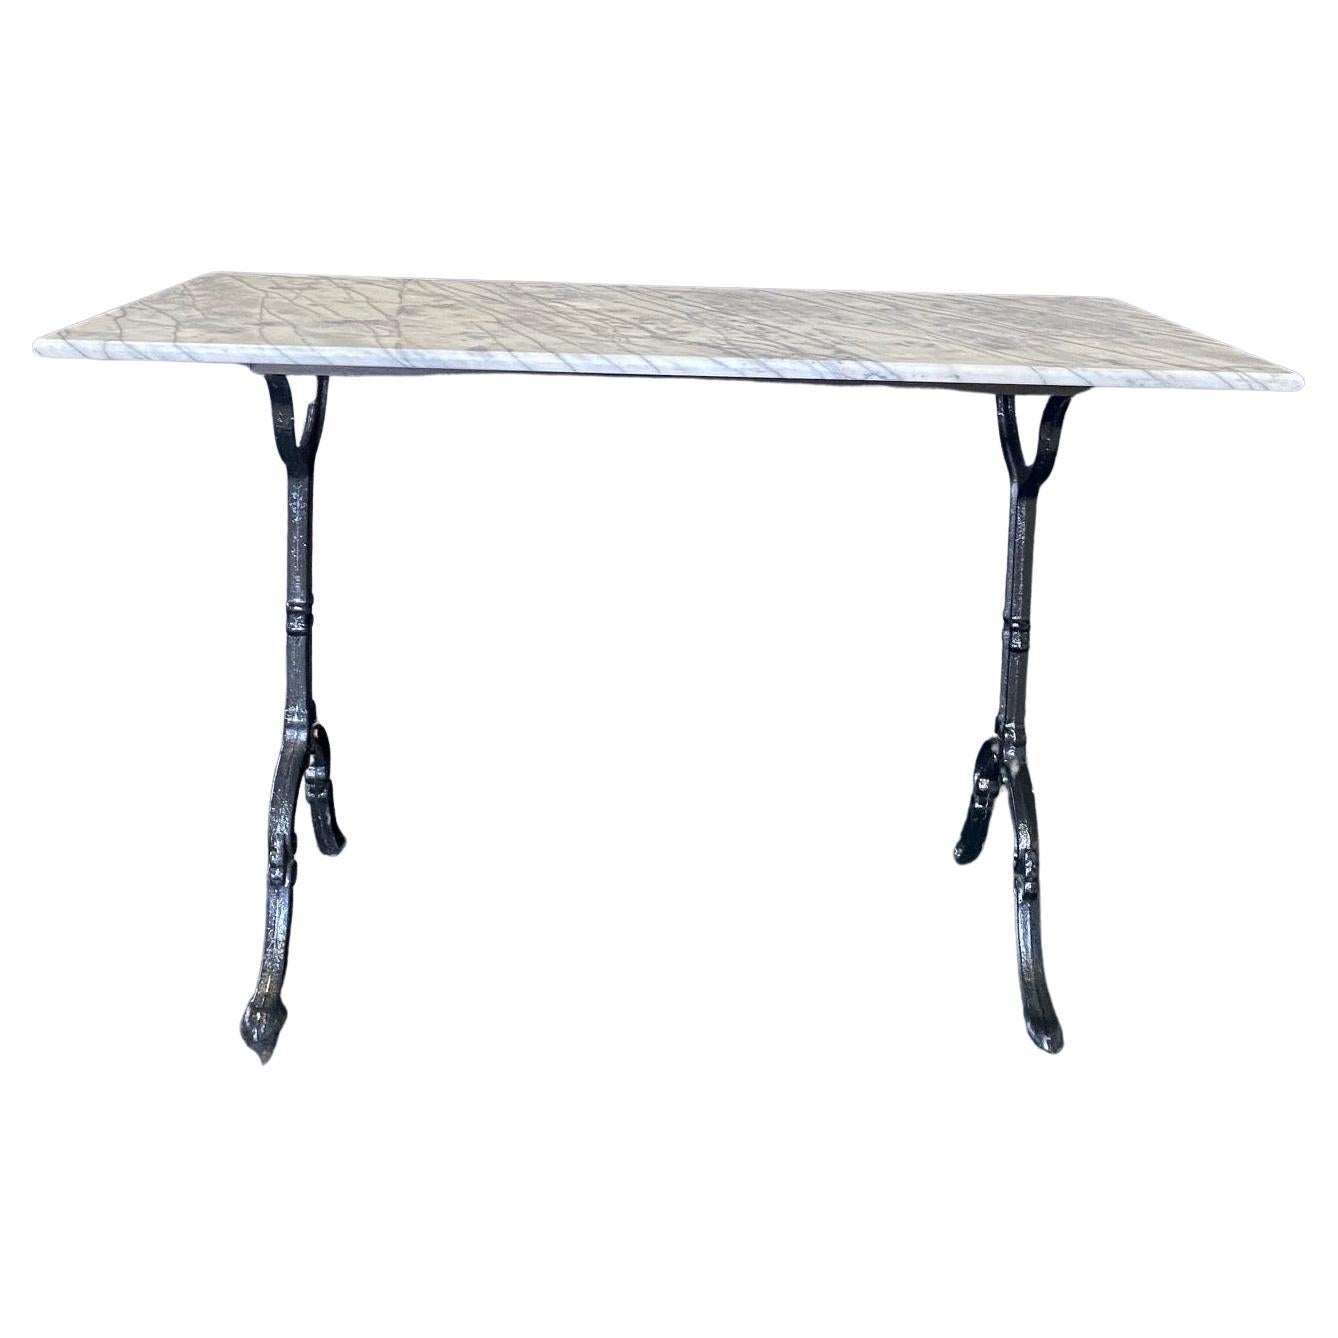 Garden or Patio French Marble Top Bistro Cafe Table with Carrara Marble Top